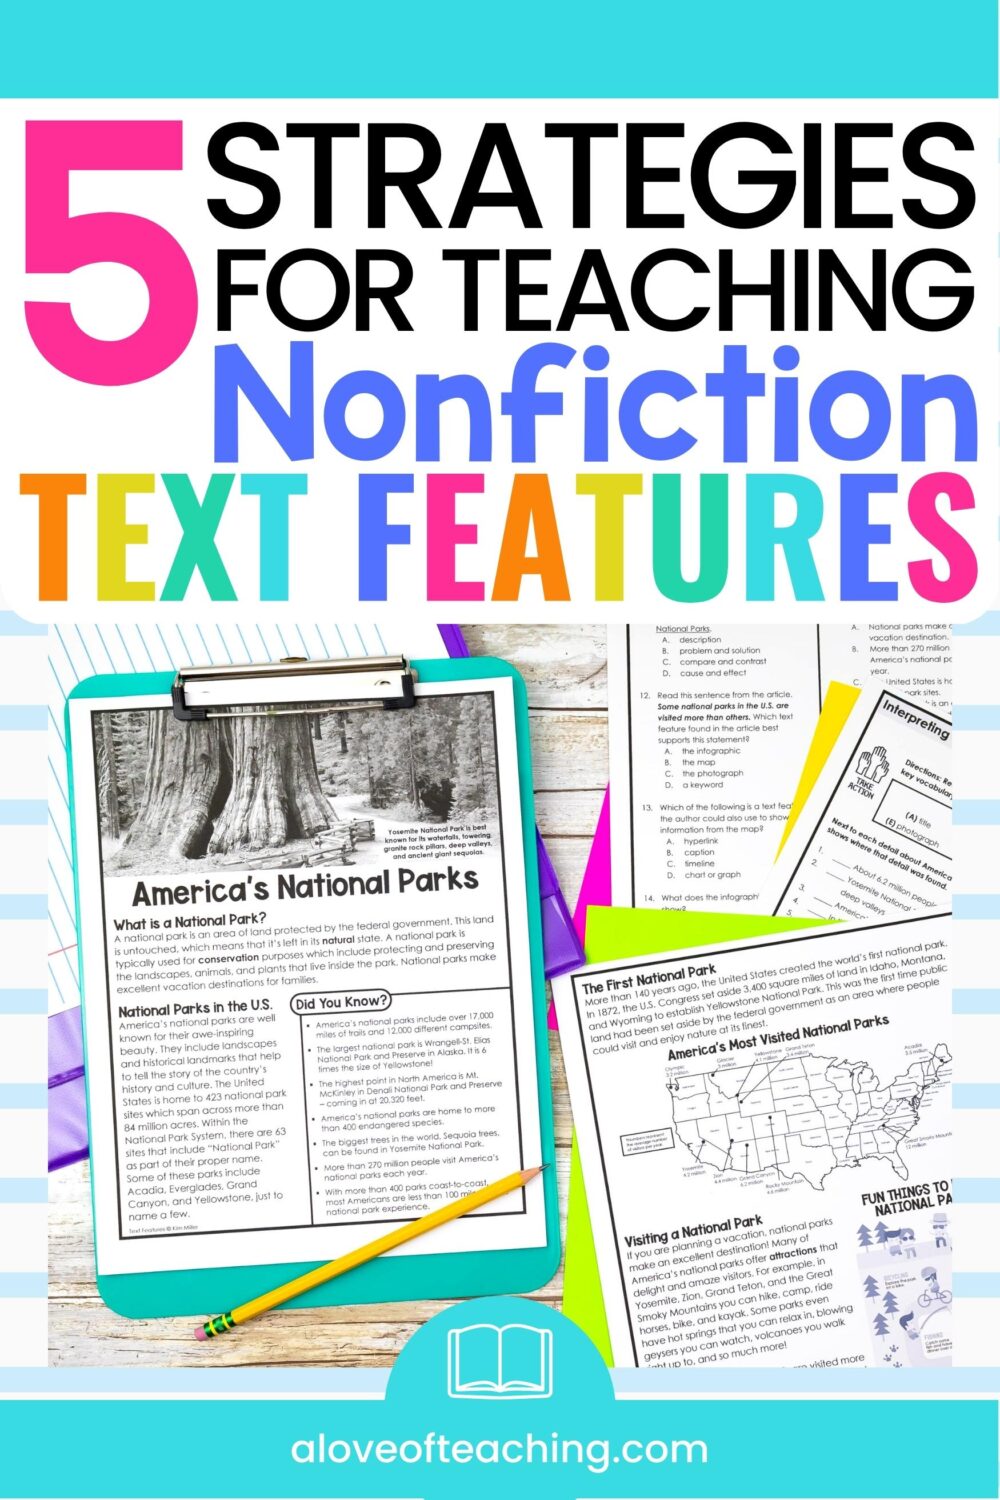 This is a blog post title graphic that says "5 Strategies for Teaching Nonfiction Text Features" with a photograph of a nonfiction text features activity for upper elementary grades.